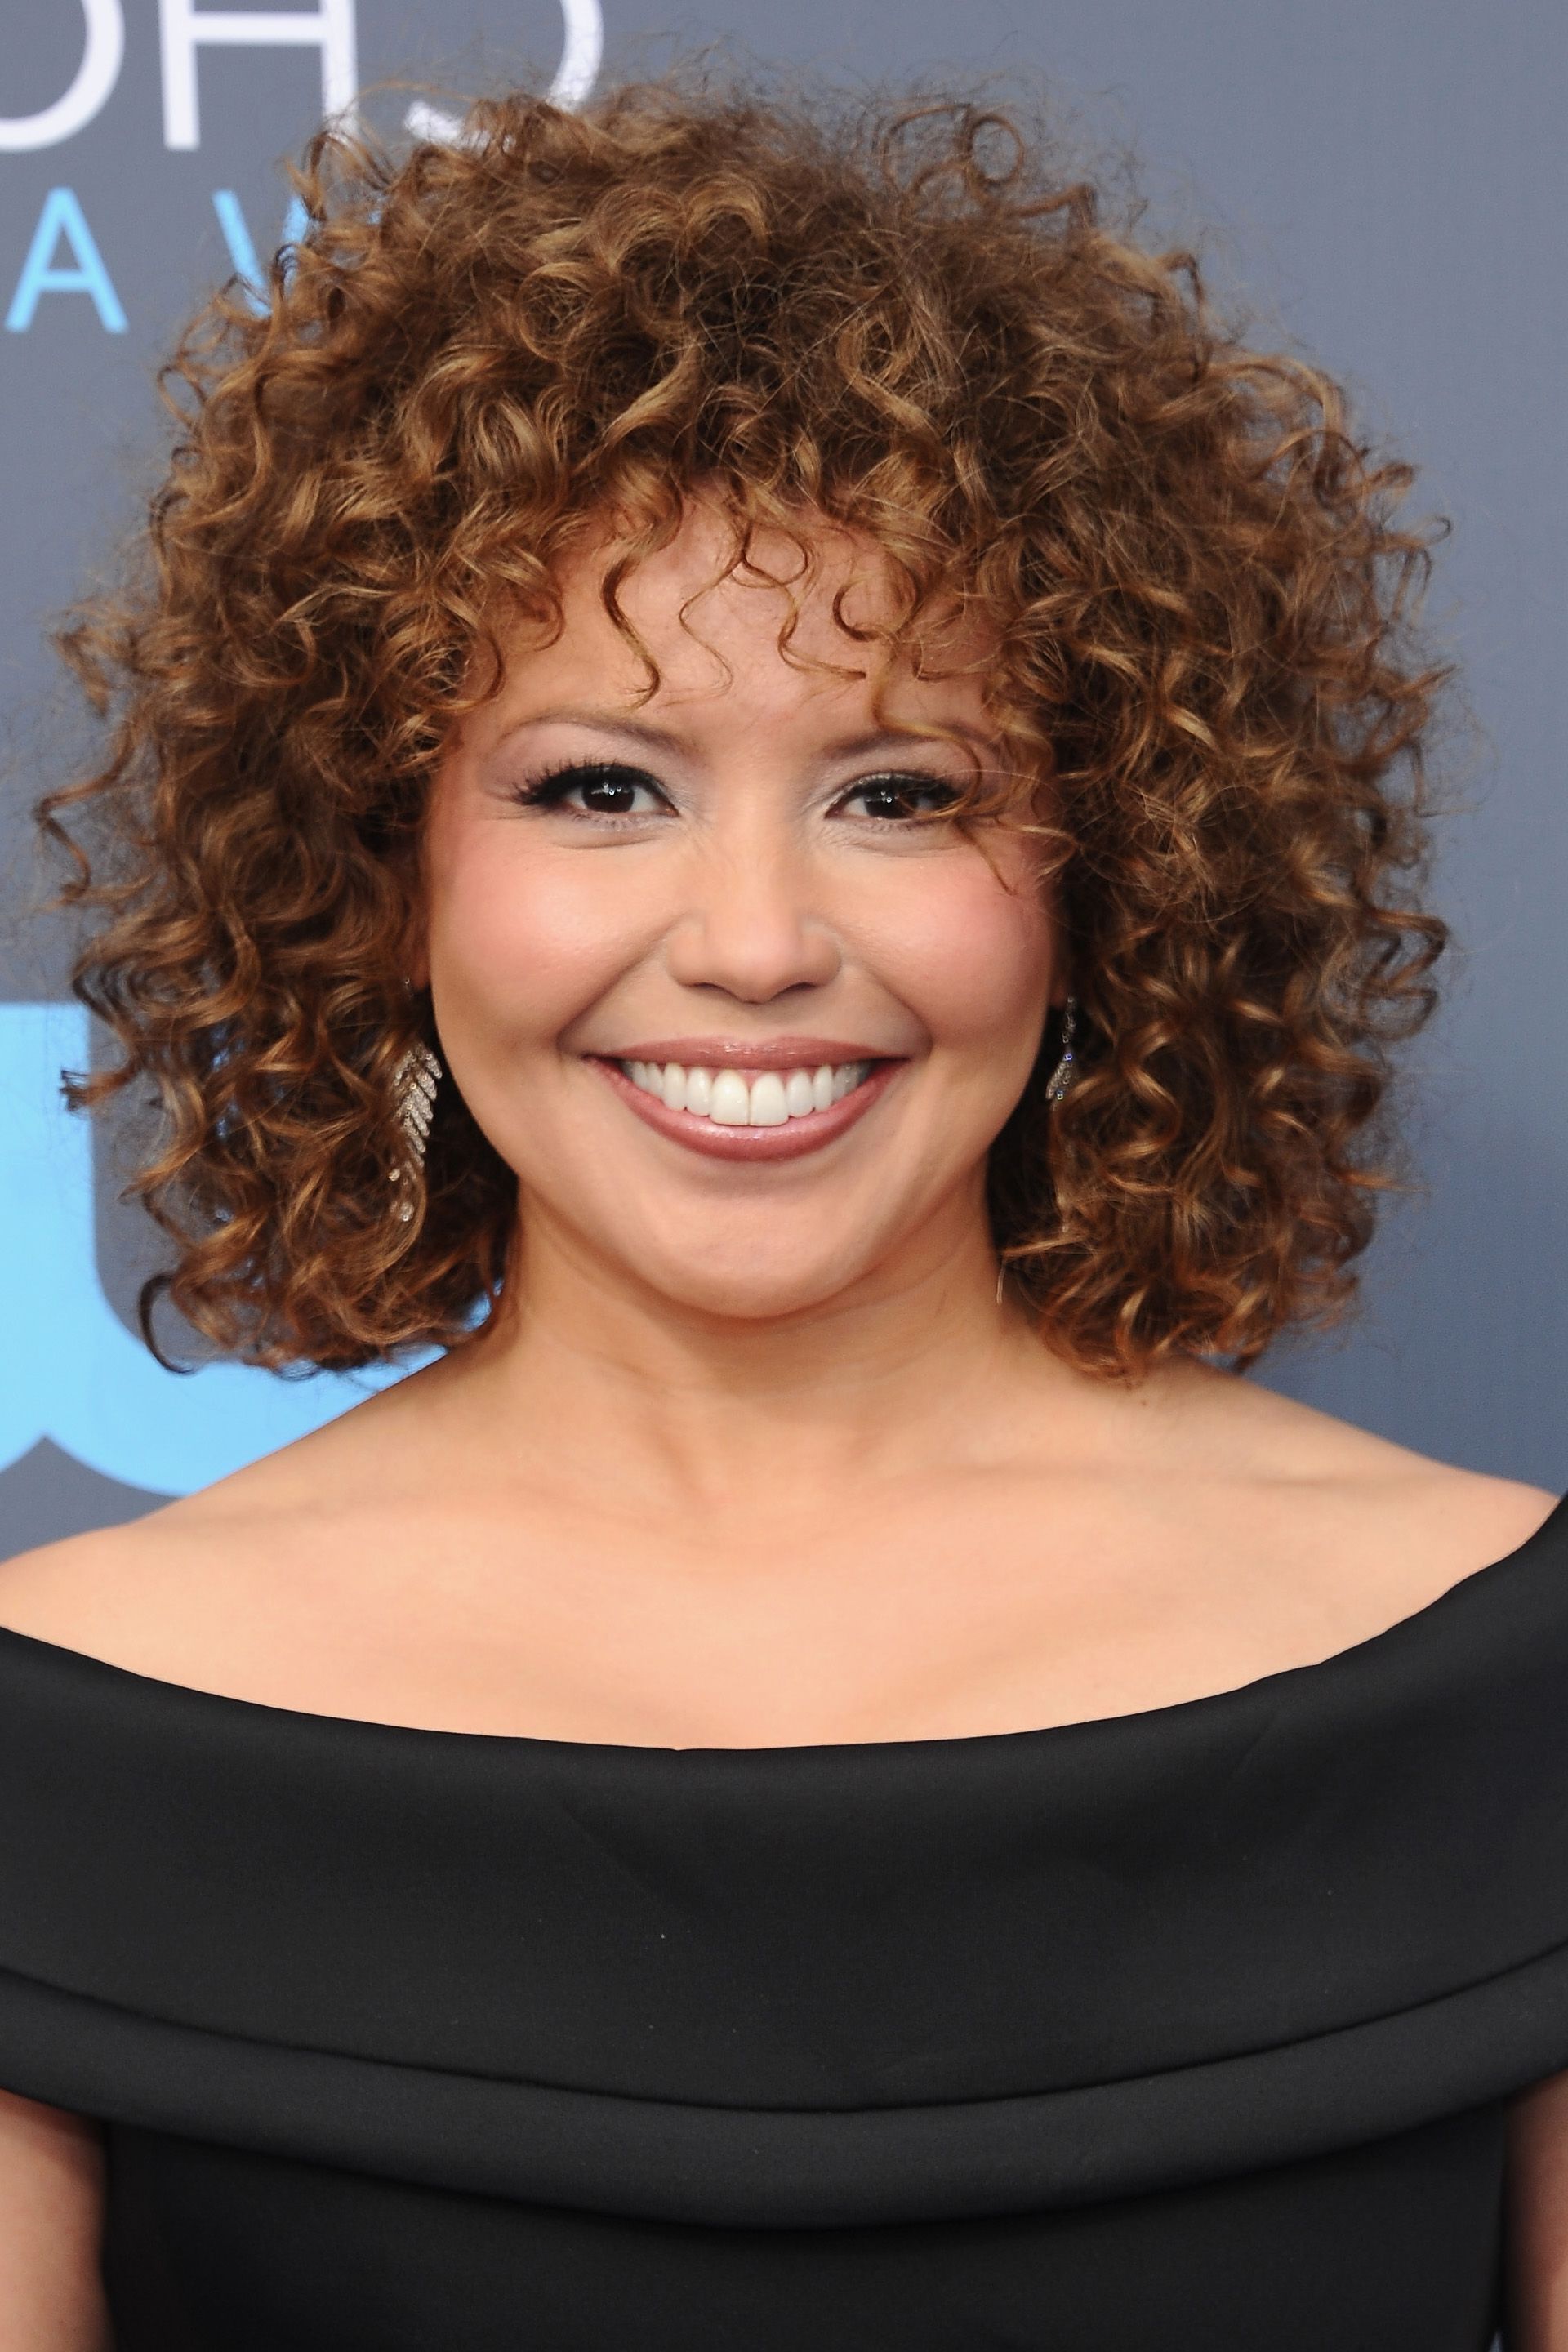 20 Celebrity Short Curly Hair Ideas – Short Haircuts And Hairstyles Intended For Big Curls Short Hairstyles (Photo 21 of 25)